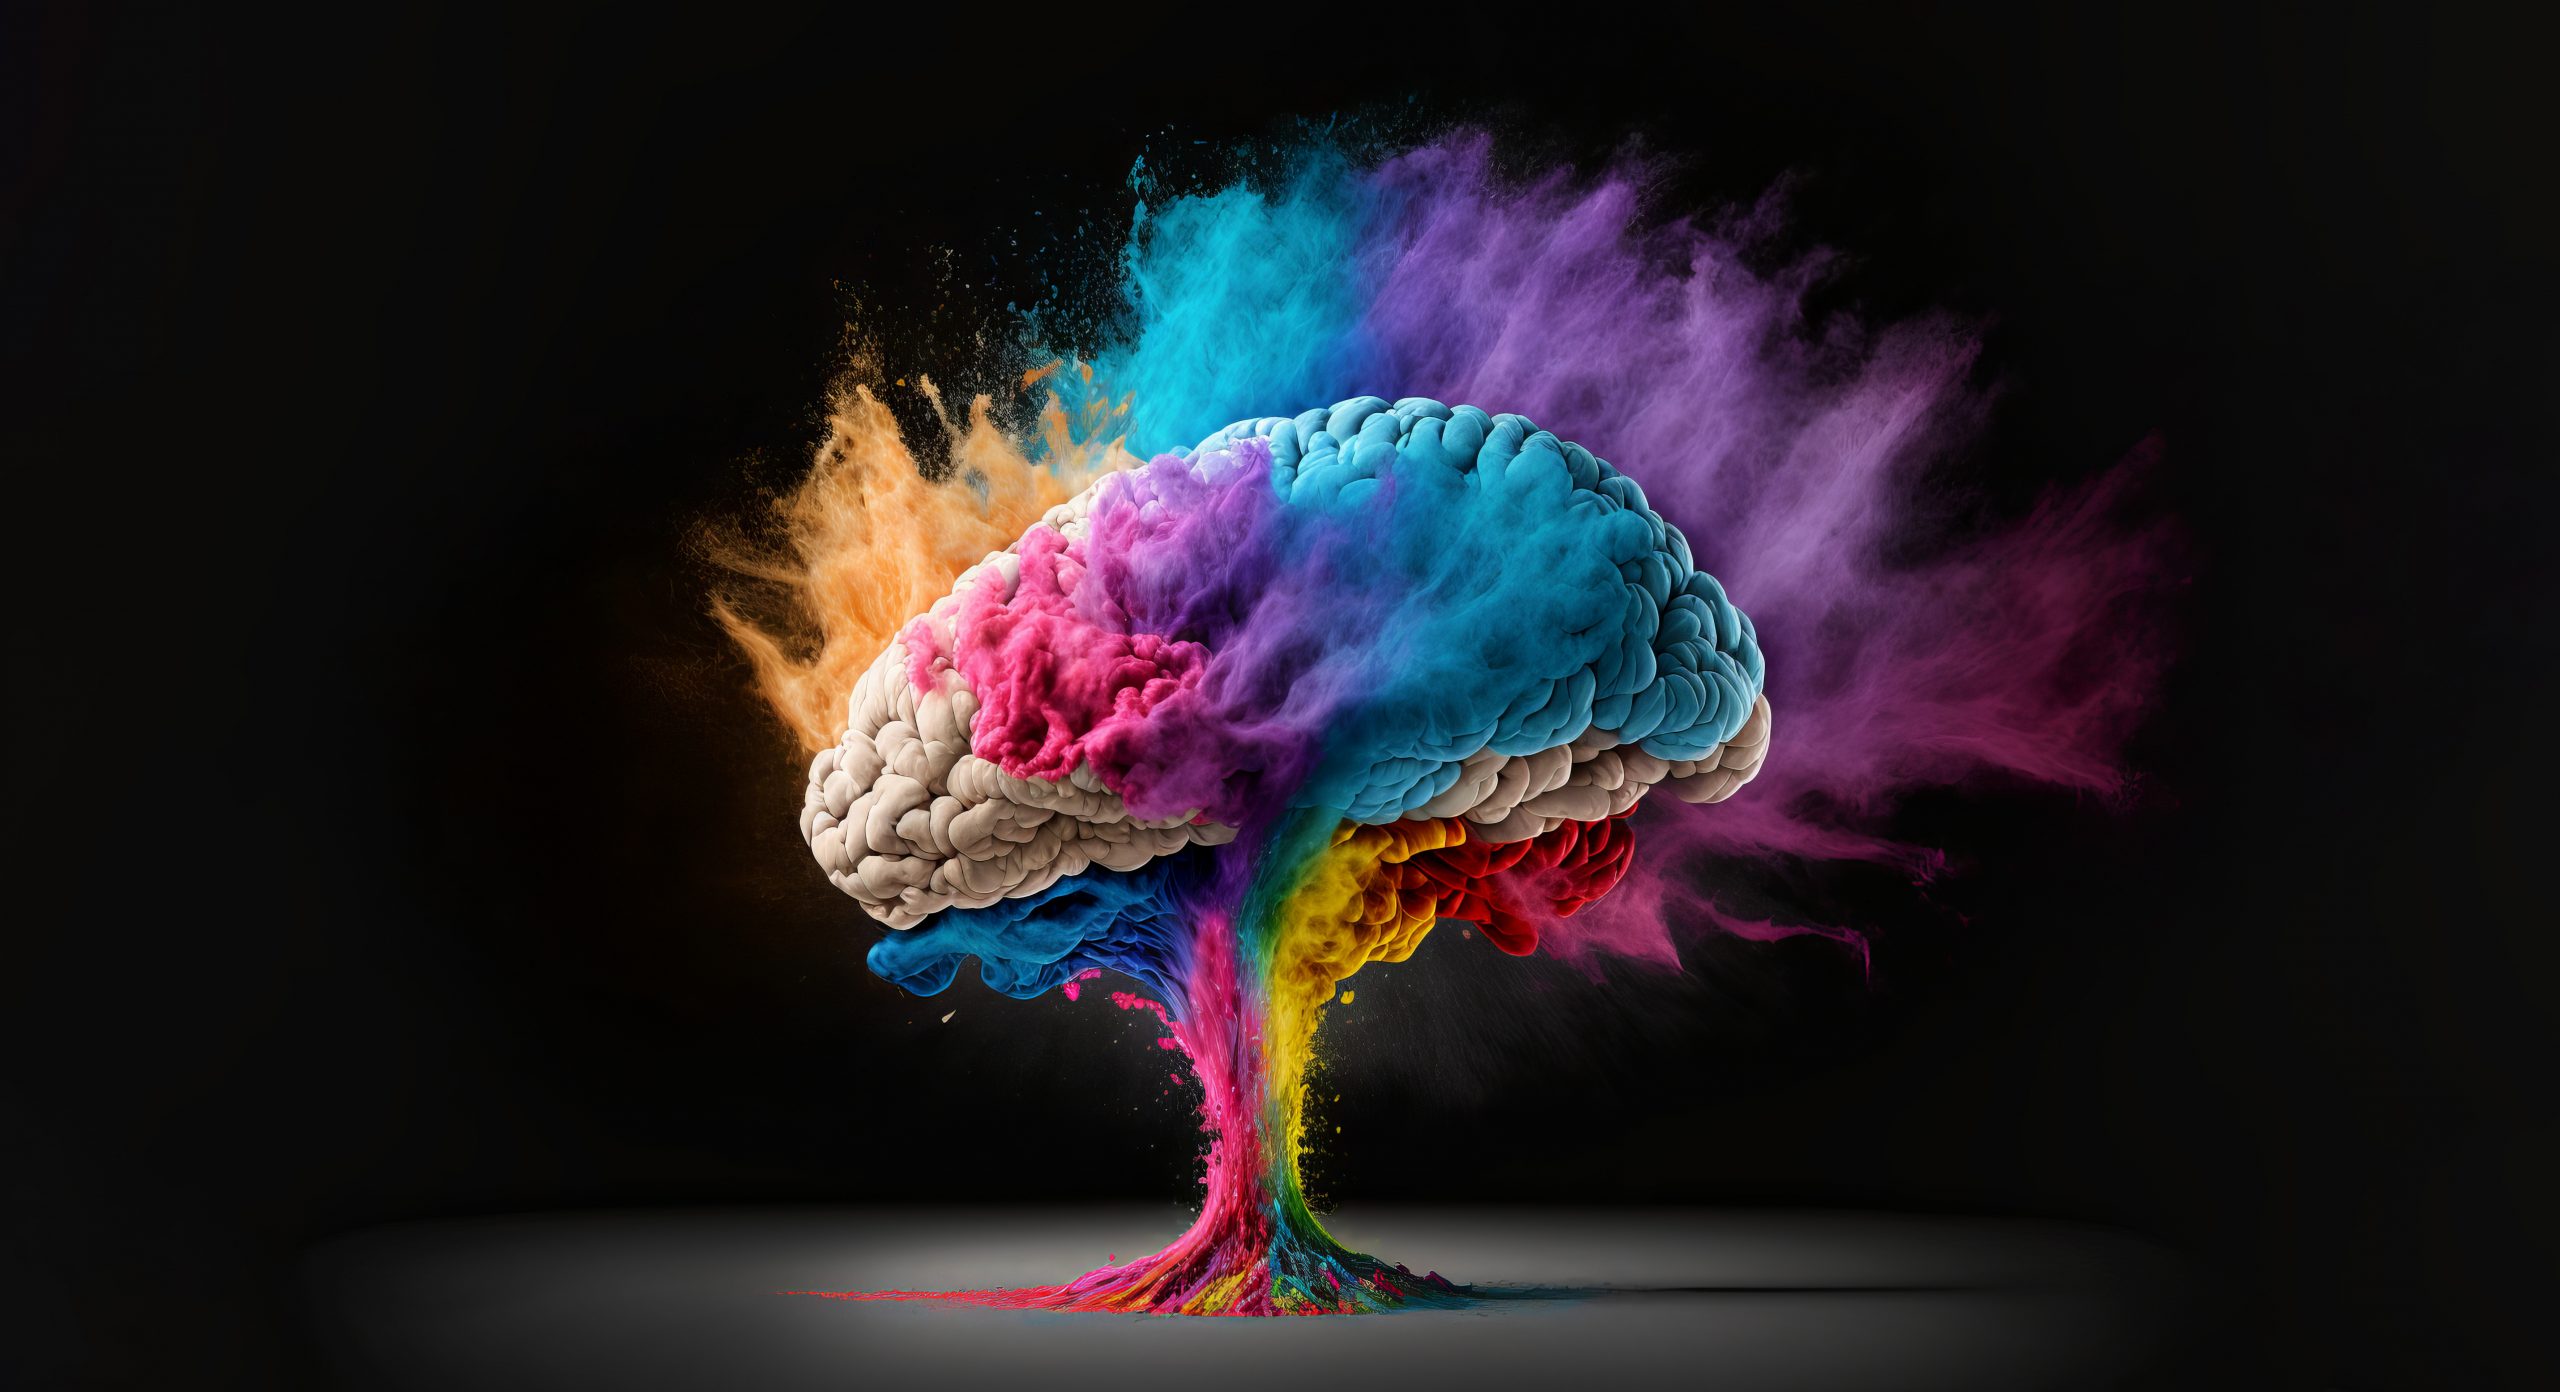 Concept art of a human brain exploding with knowledge and creativity